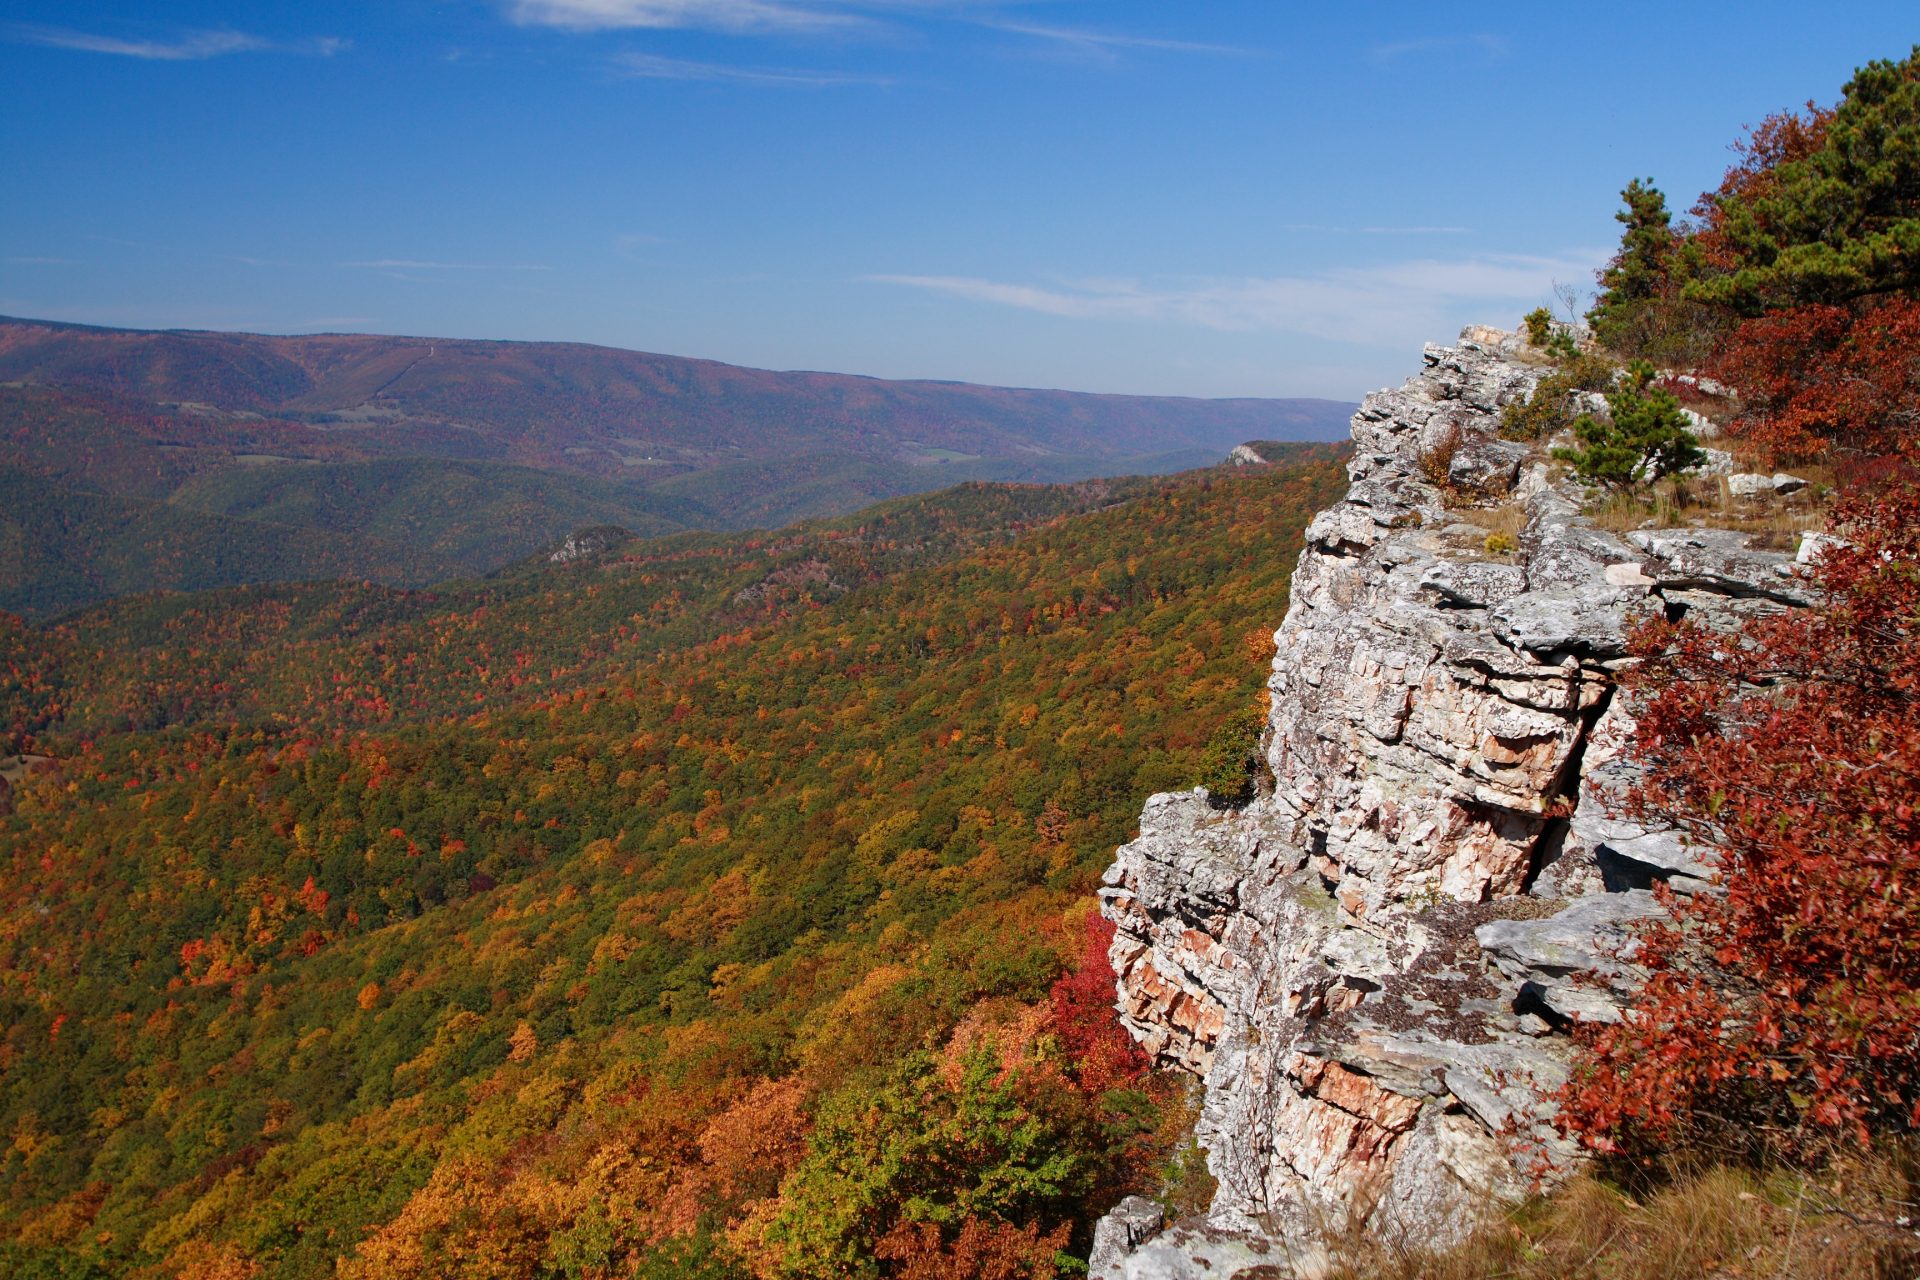 High Point, North Fork Mountain, West Virginia